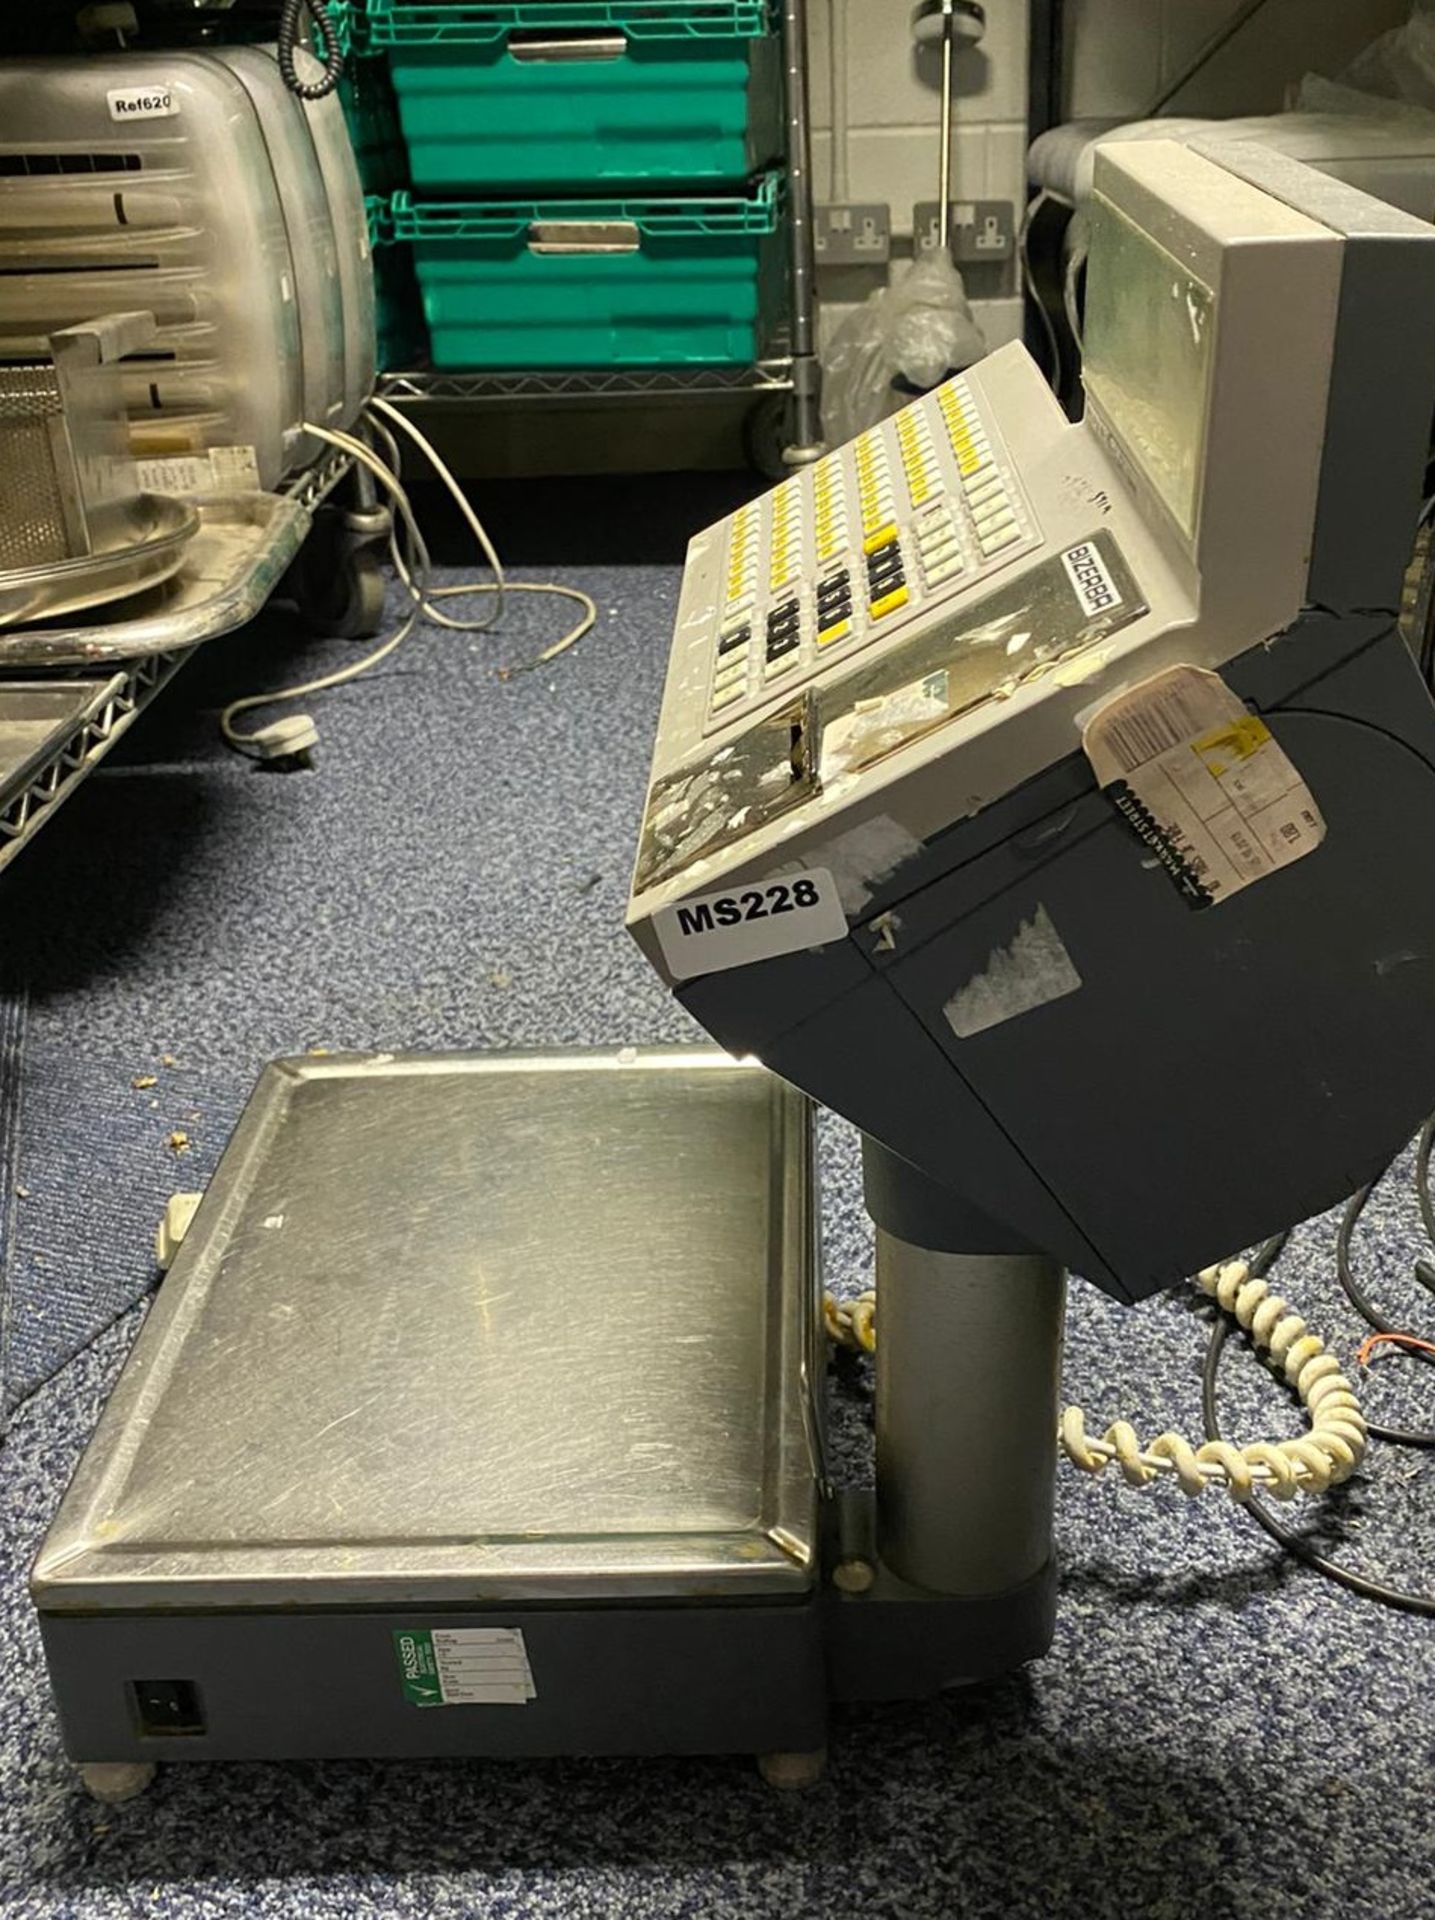 1 x Bizerba SC-H Basic Retail Weighing Scale - Used Condition - Location: Altrincham WA14 - - Image 4 of 6